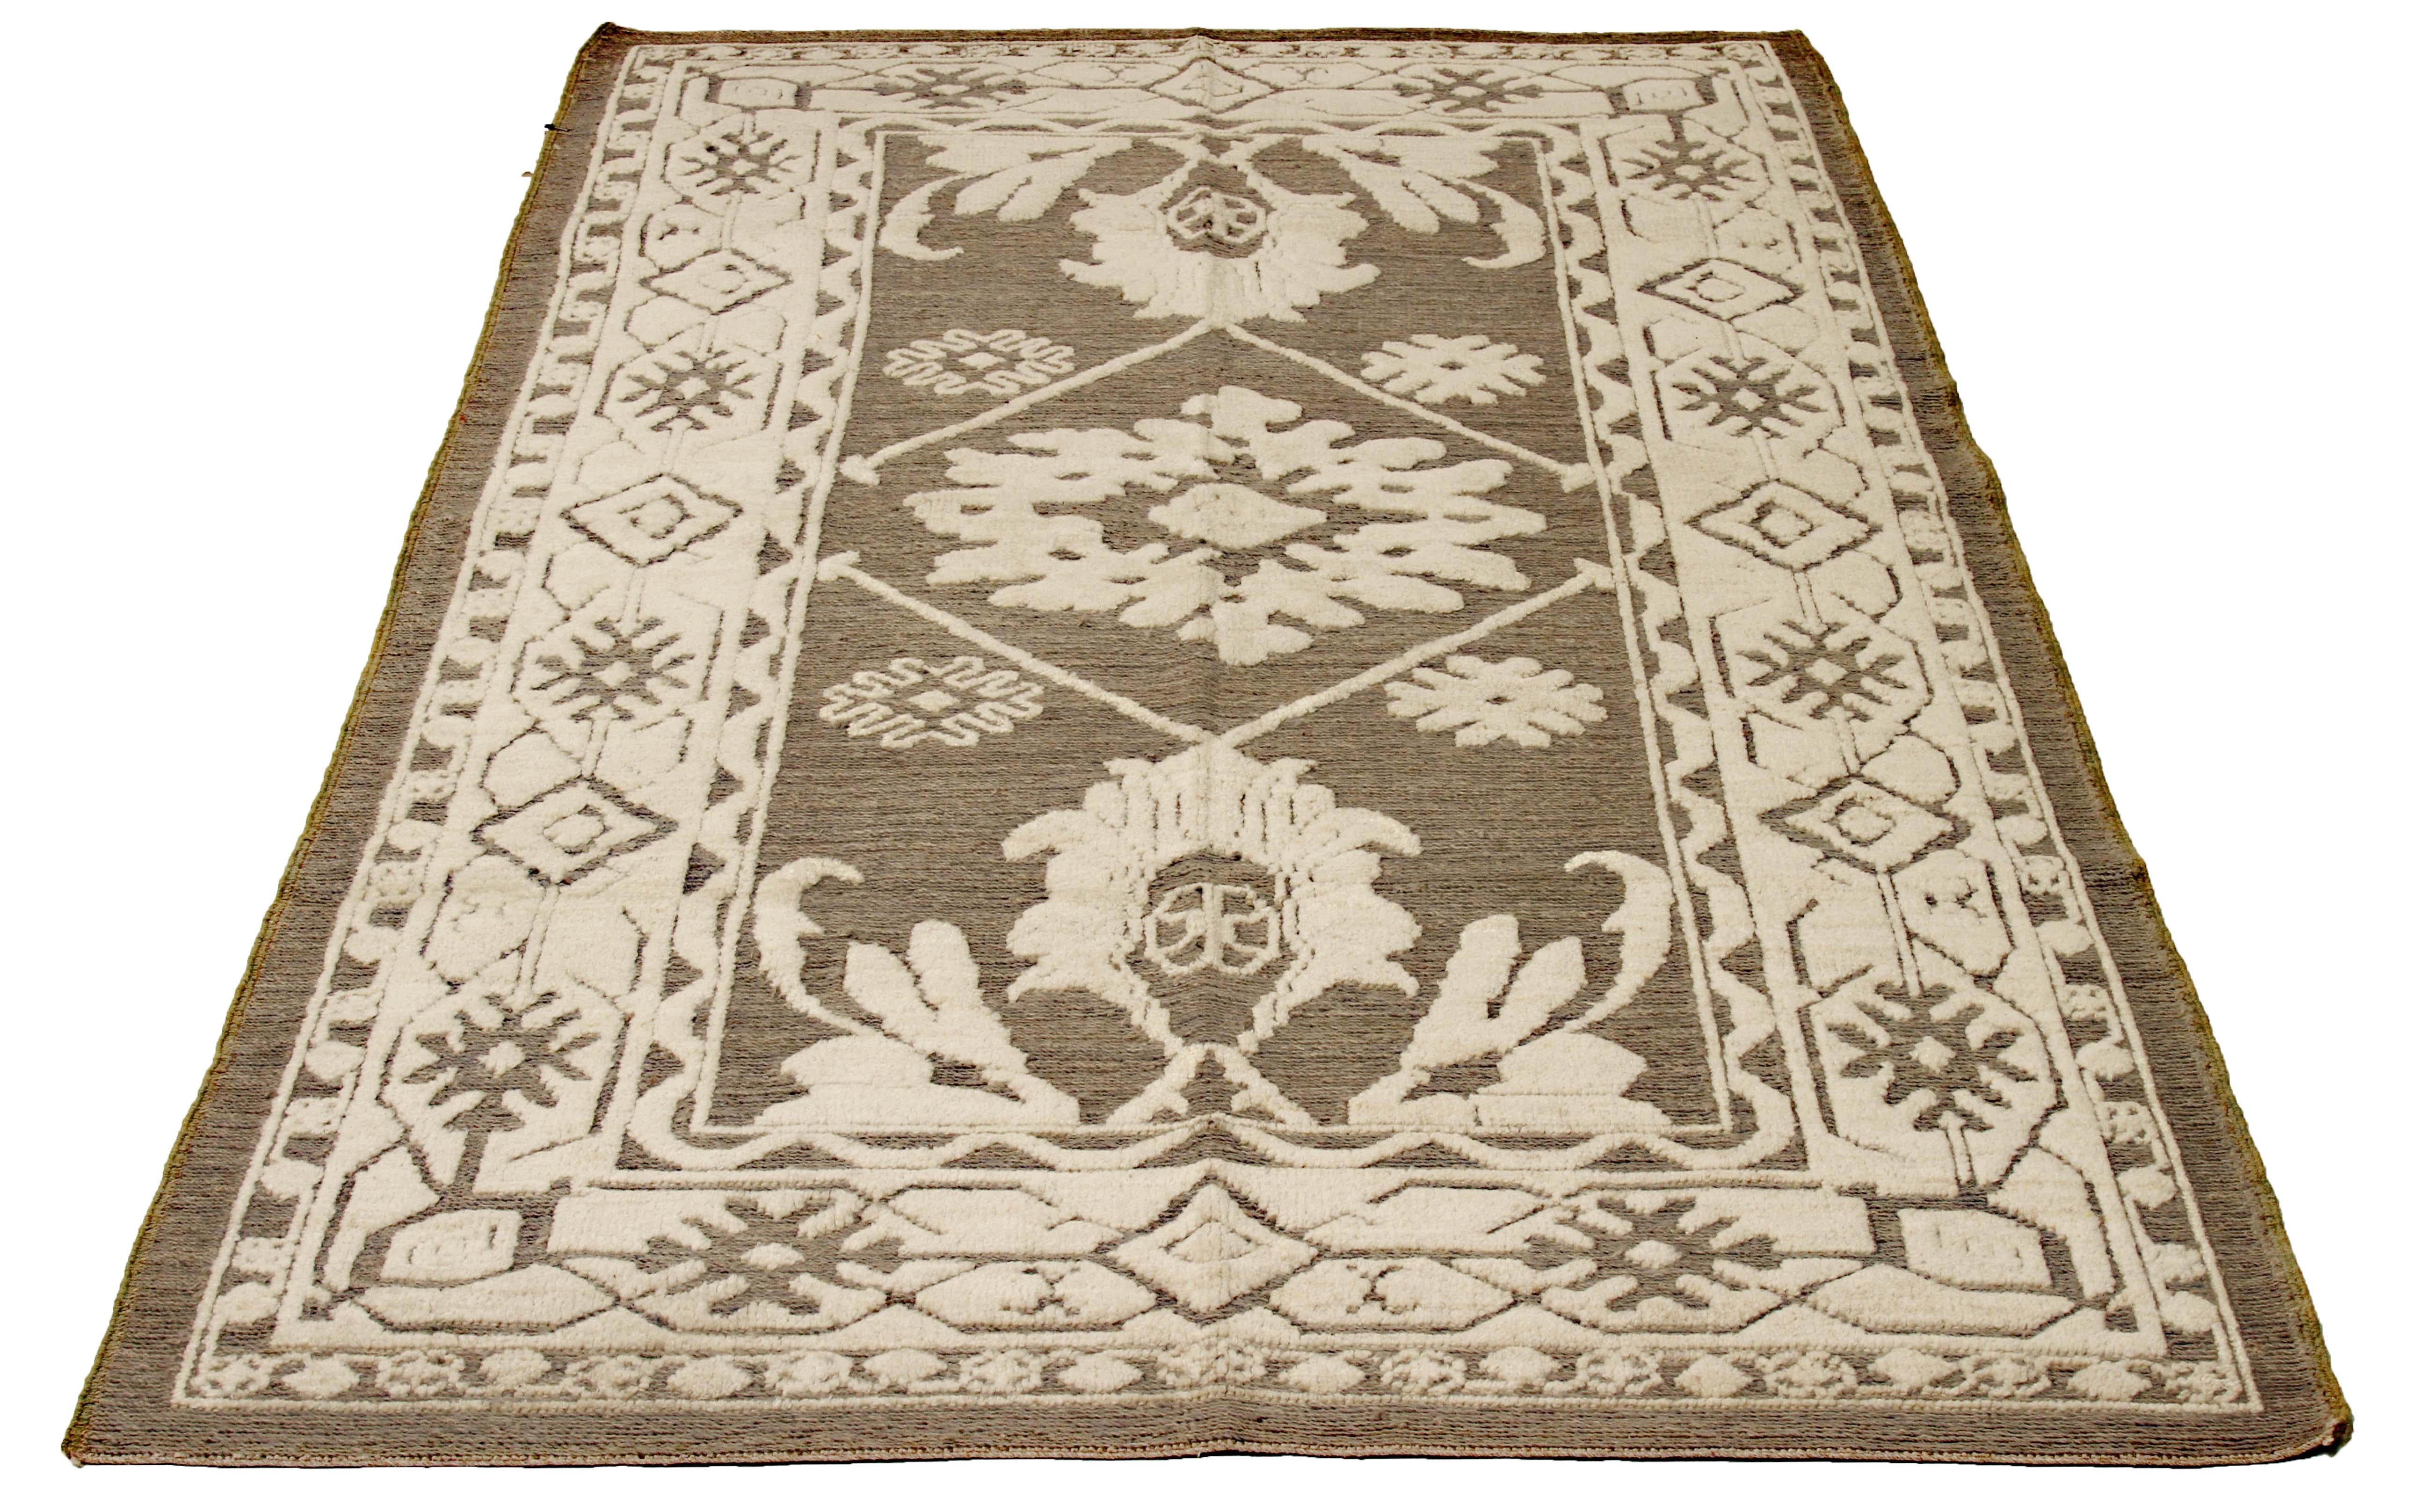 New Turkish runner rug made of handwoven sheep’s wool of the finest quality. It’s colored with organic vegetable dyes that are certified safe for humans and pets alike. It features rows of botanical details all-over associated with Oushak weaving